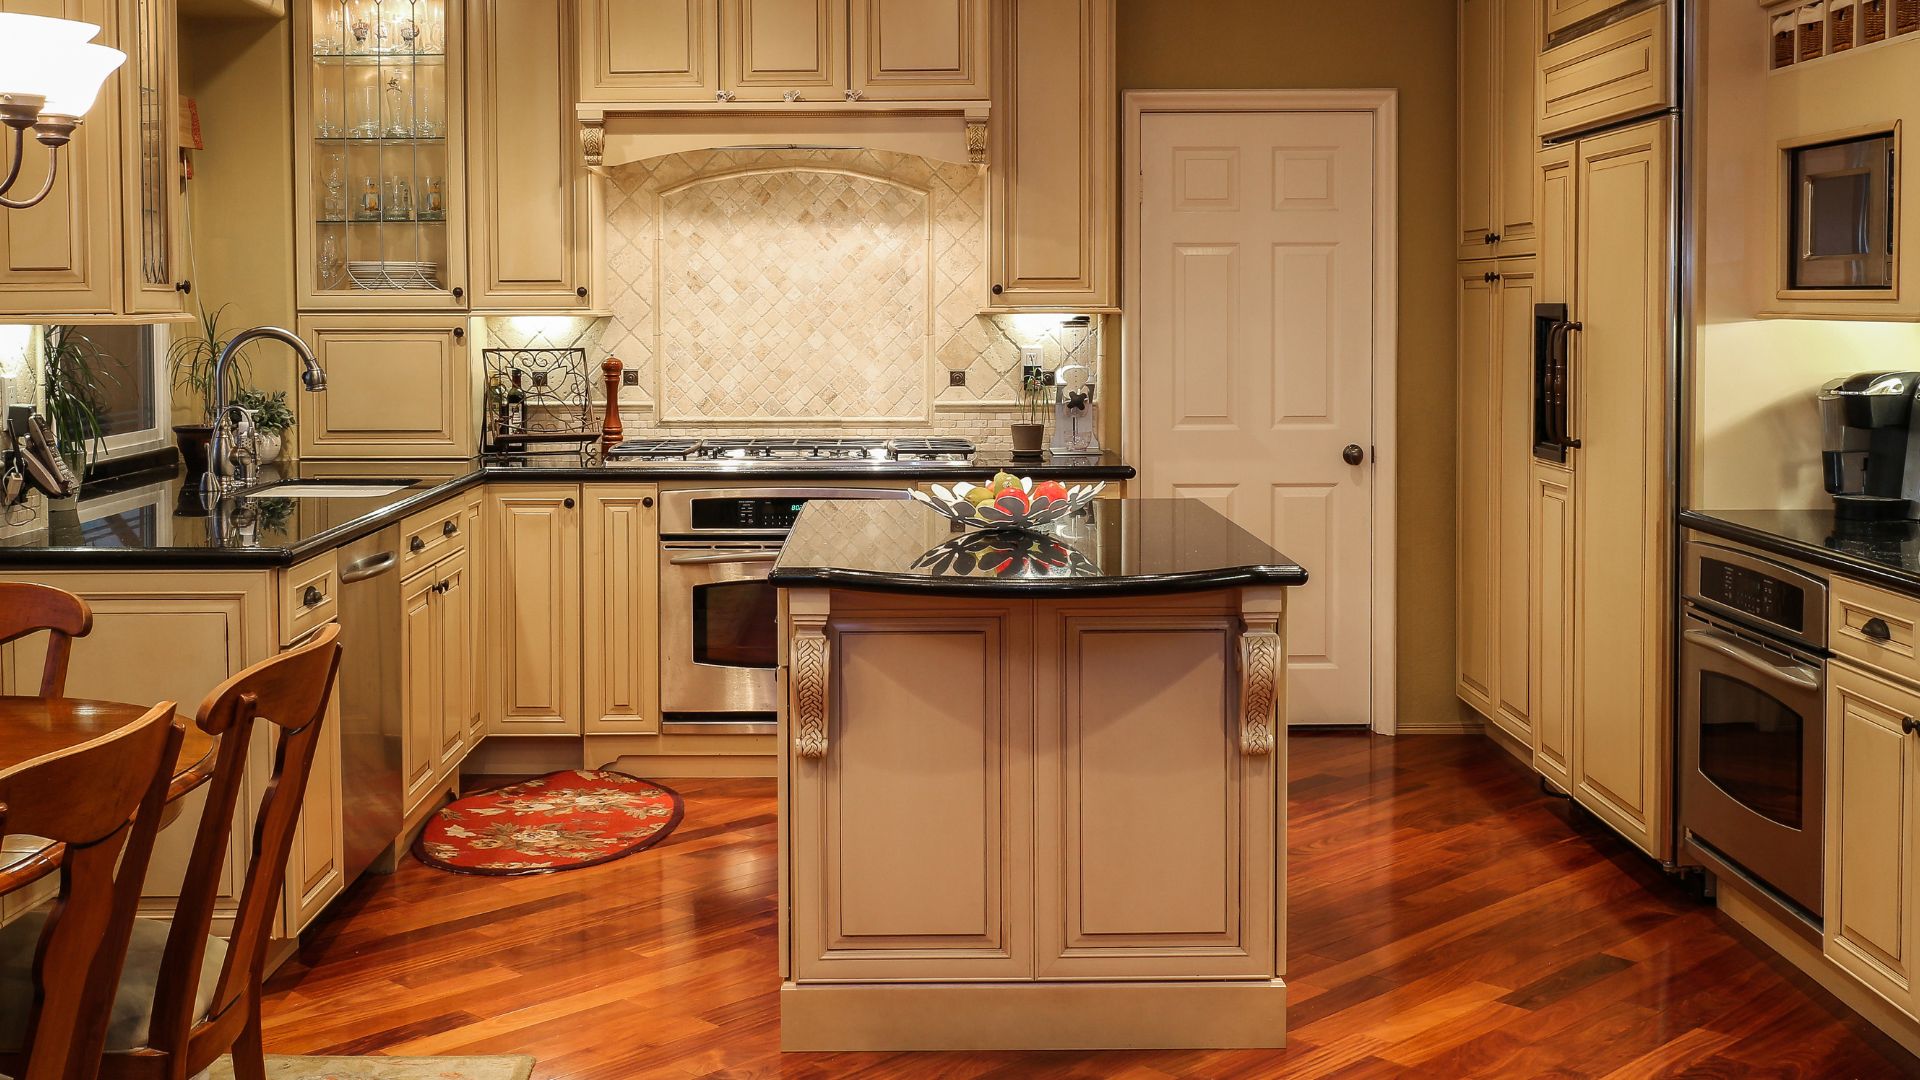 Traditional style kitchen with beige cabinets and wood flooring